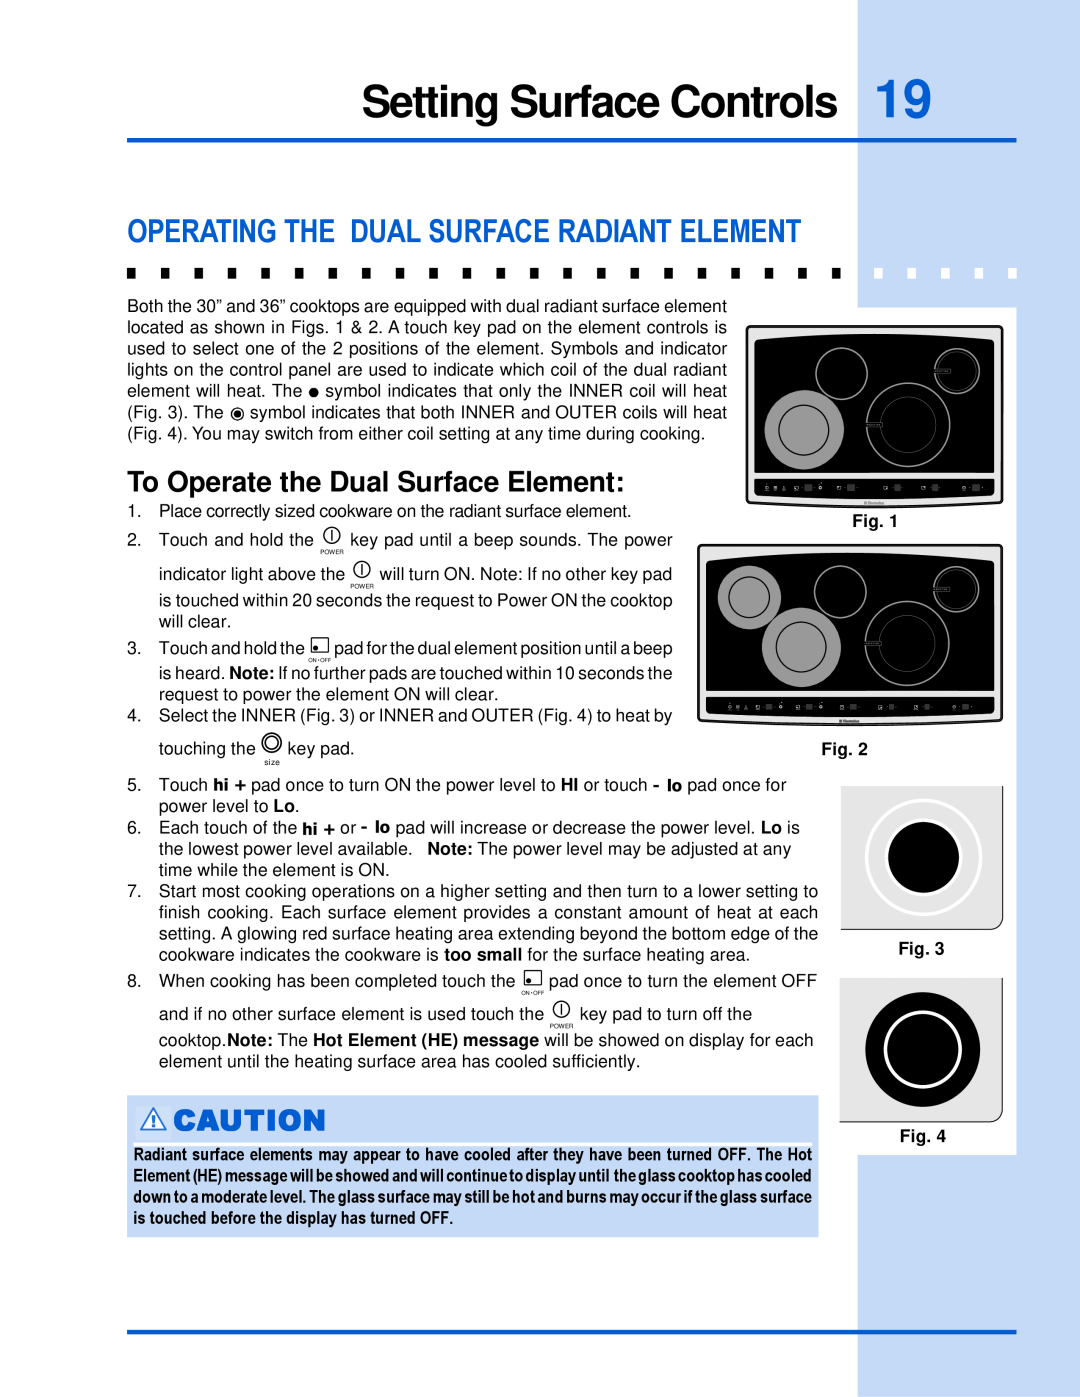 Electrolux 318 203 603 (0709) manual Setting Surface Controls, Operating The Dual Surface Radiant Element 